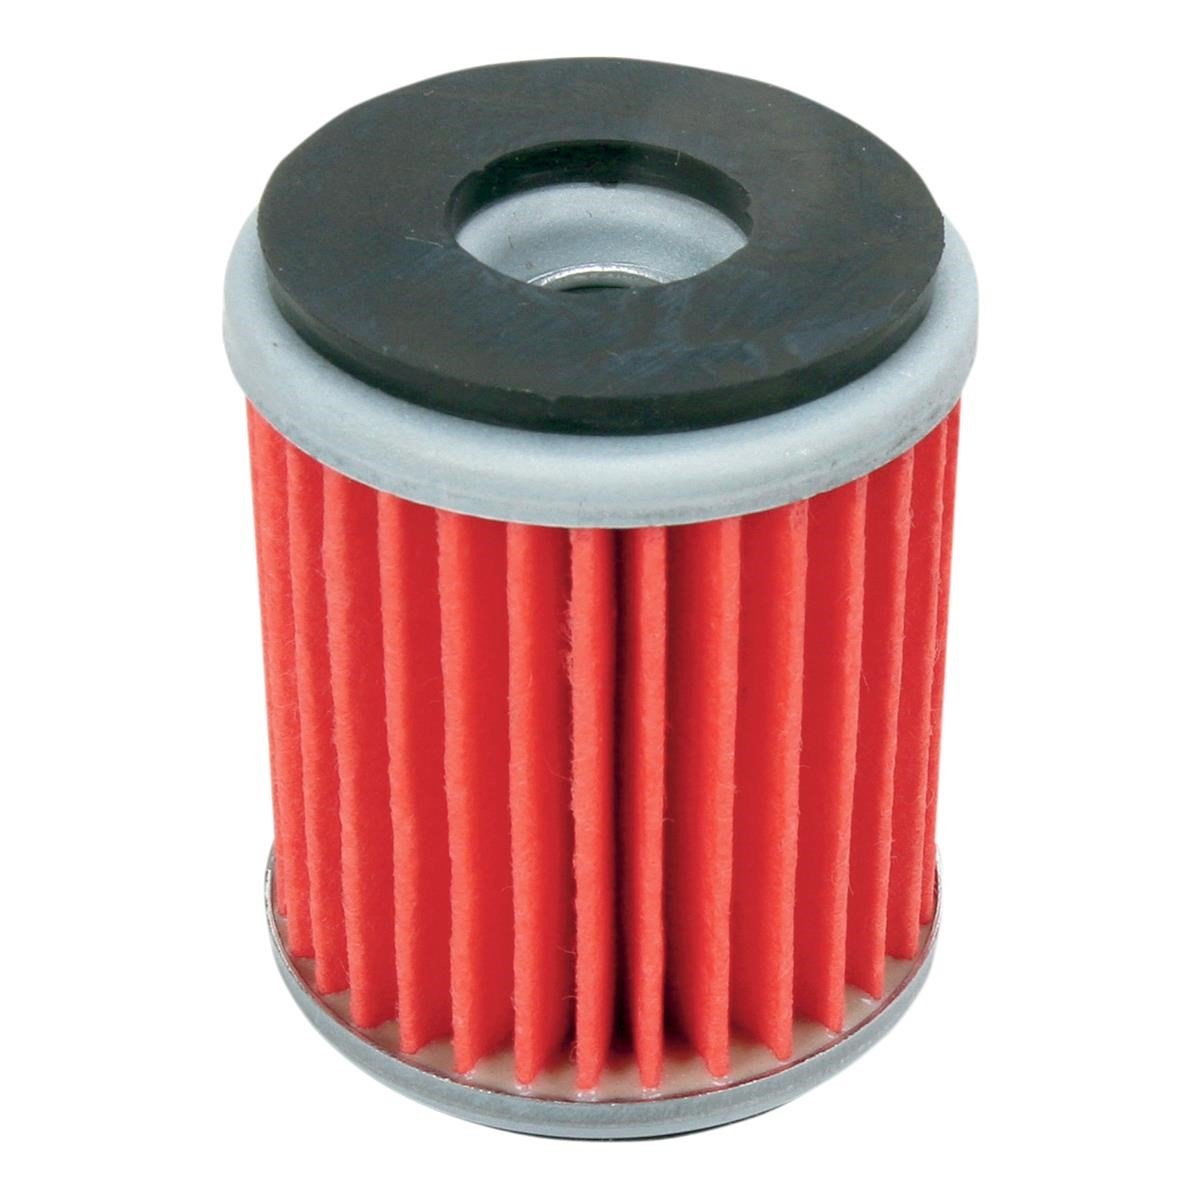 DT-1 Filters Filtro Olio DT0141 Yamaha YZF/WRF 250/450 03-17